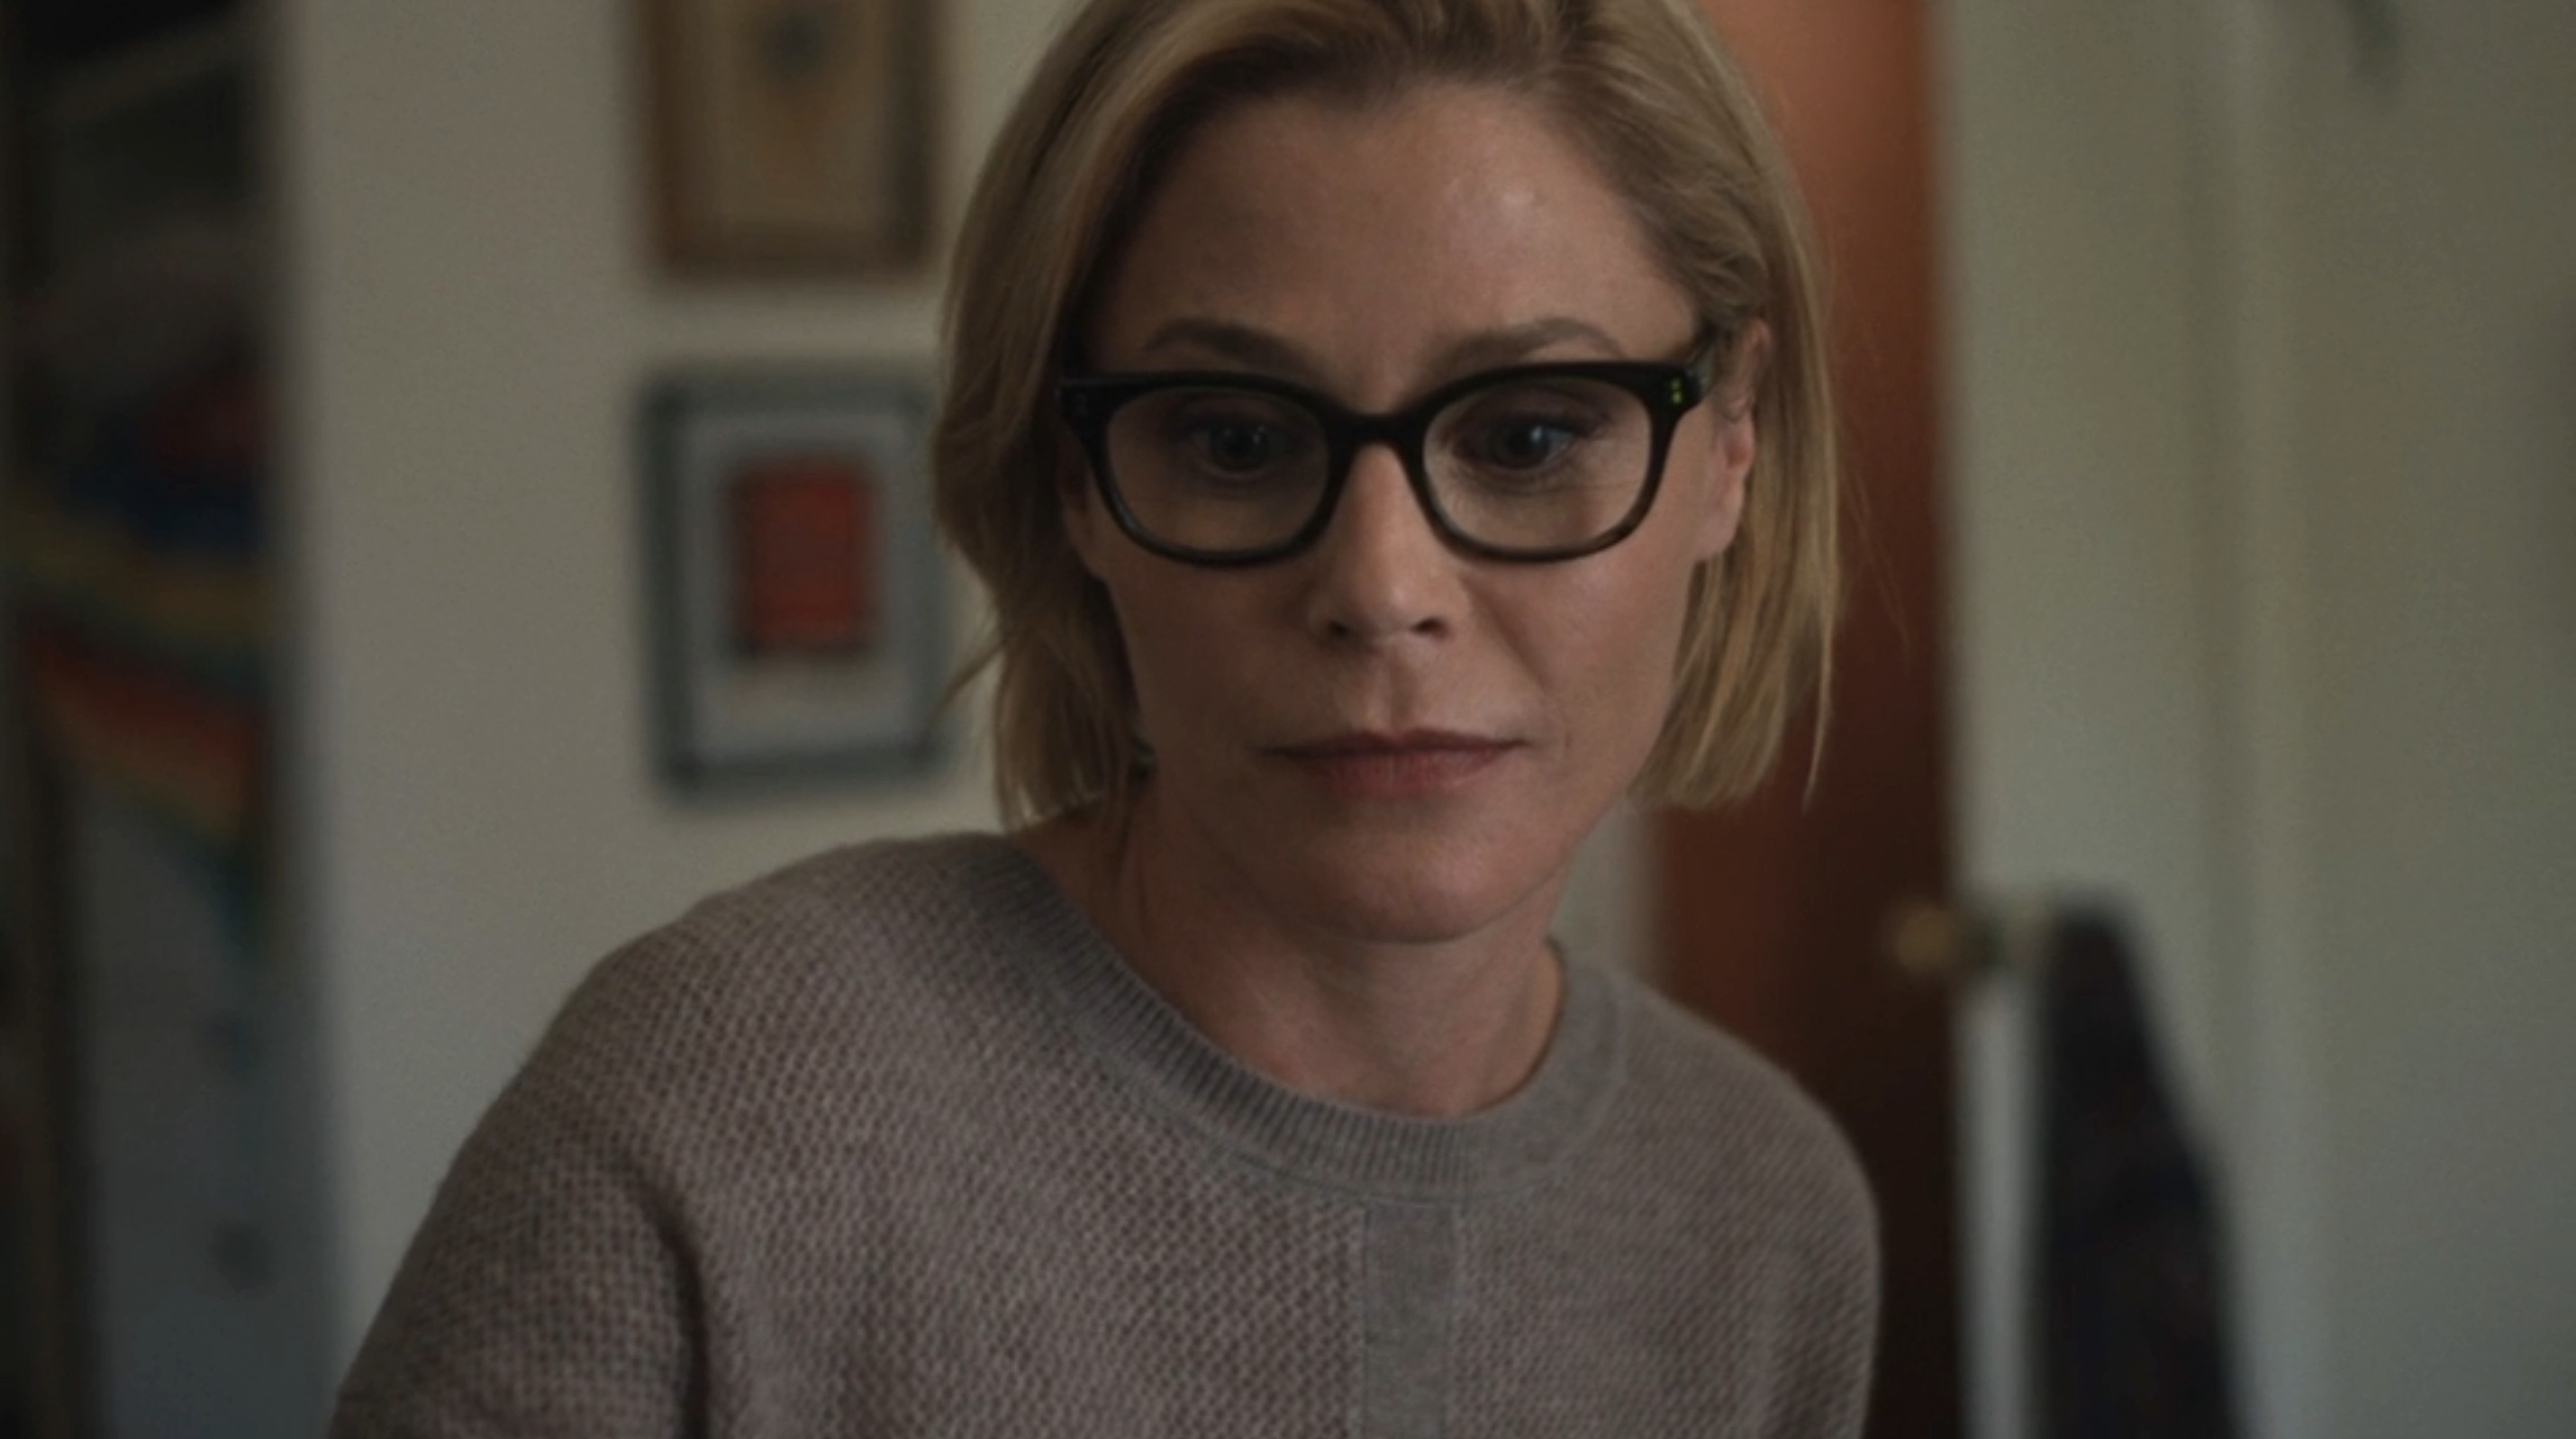 The Fallout Cast - Julie Bowen as Patricia Cavell